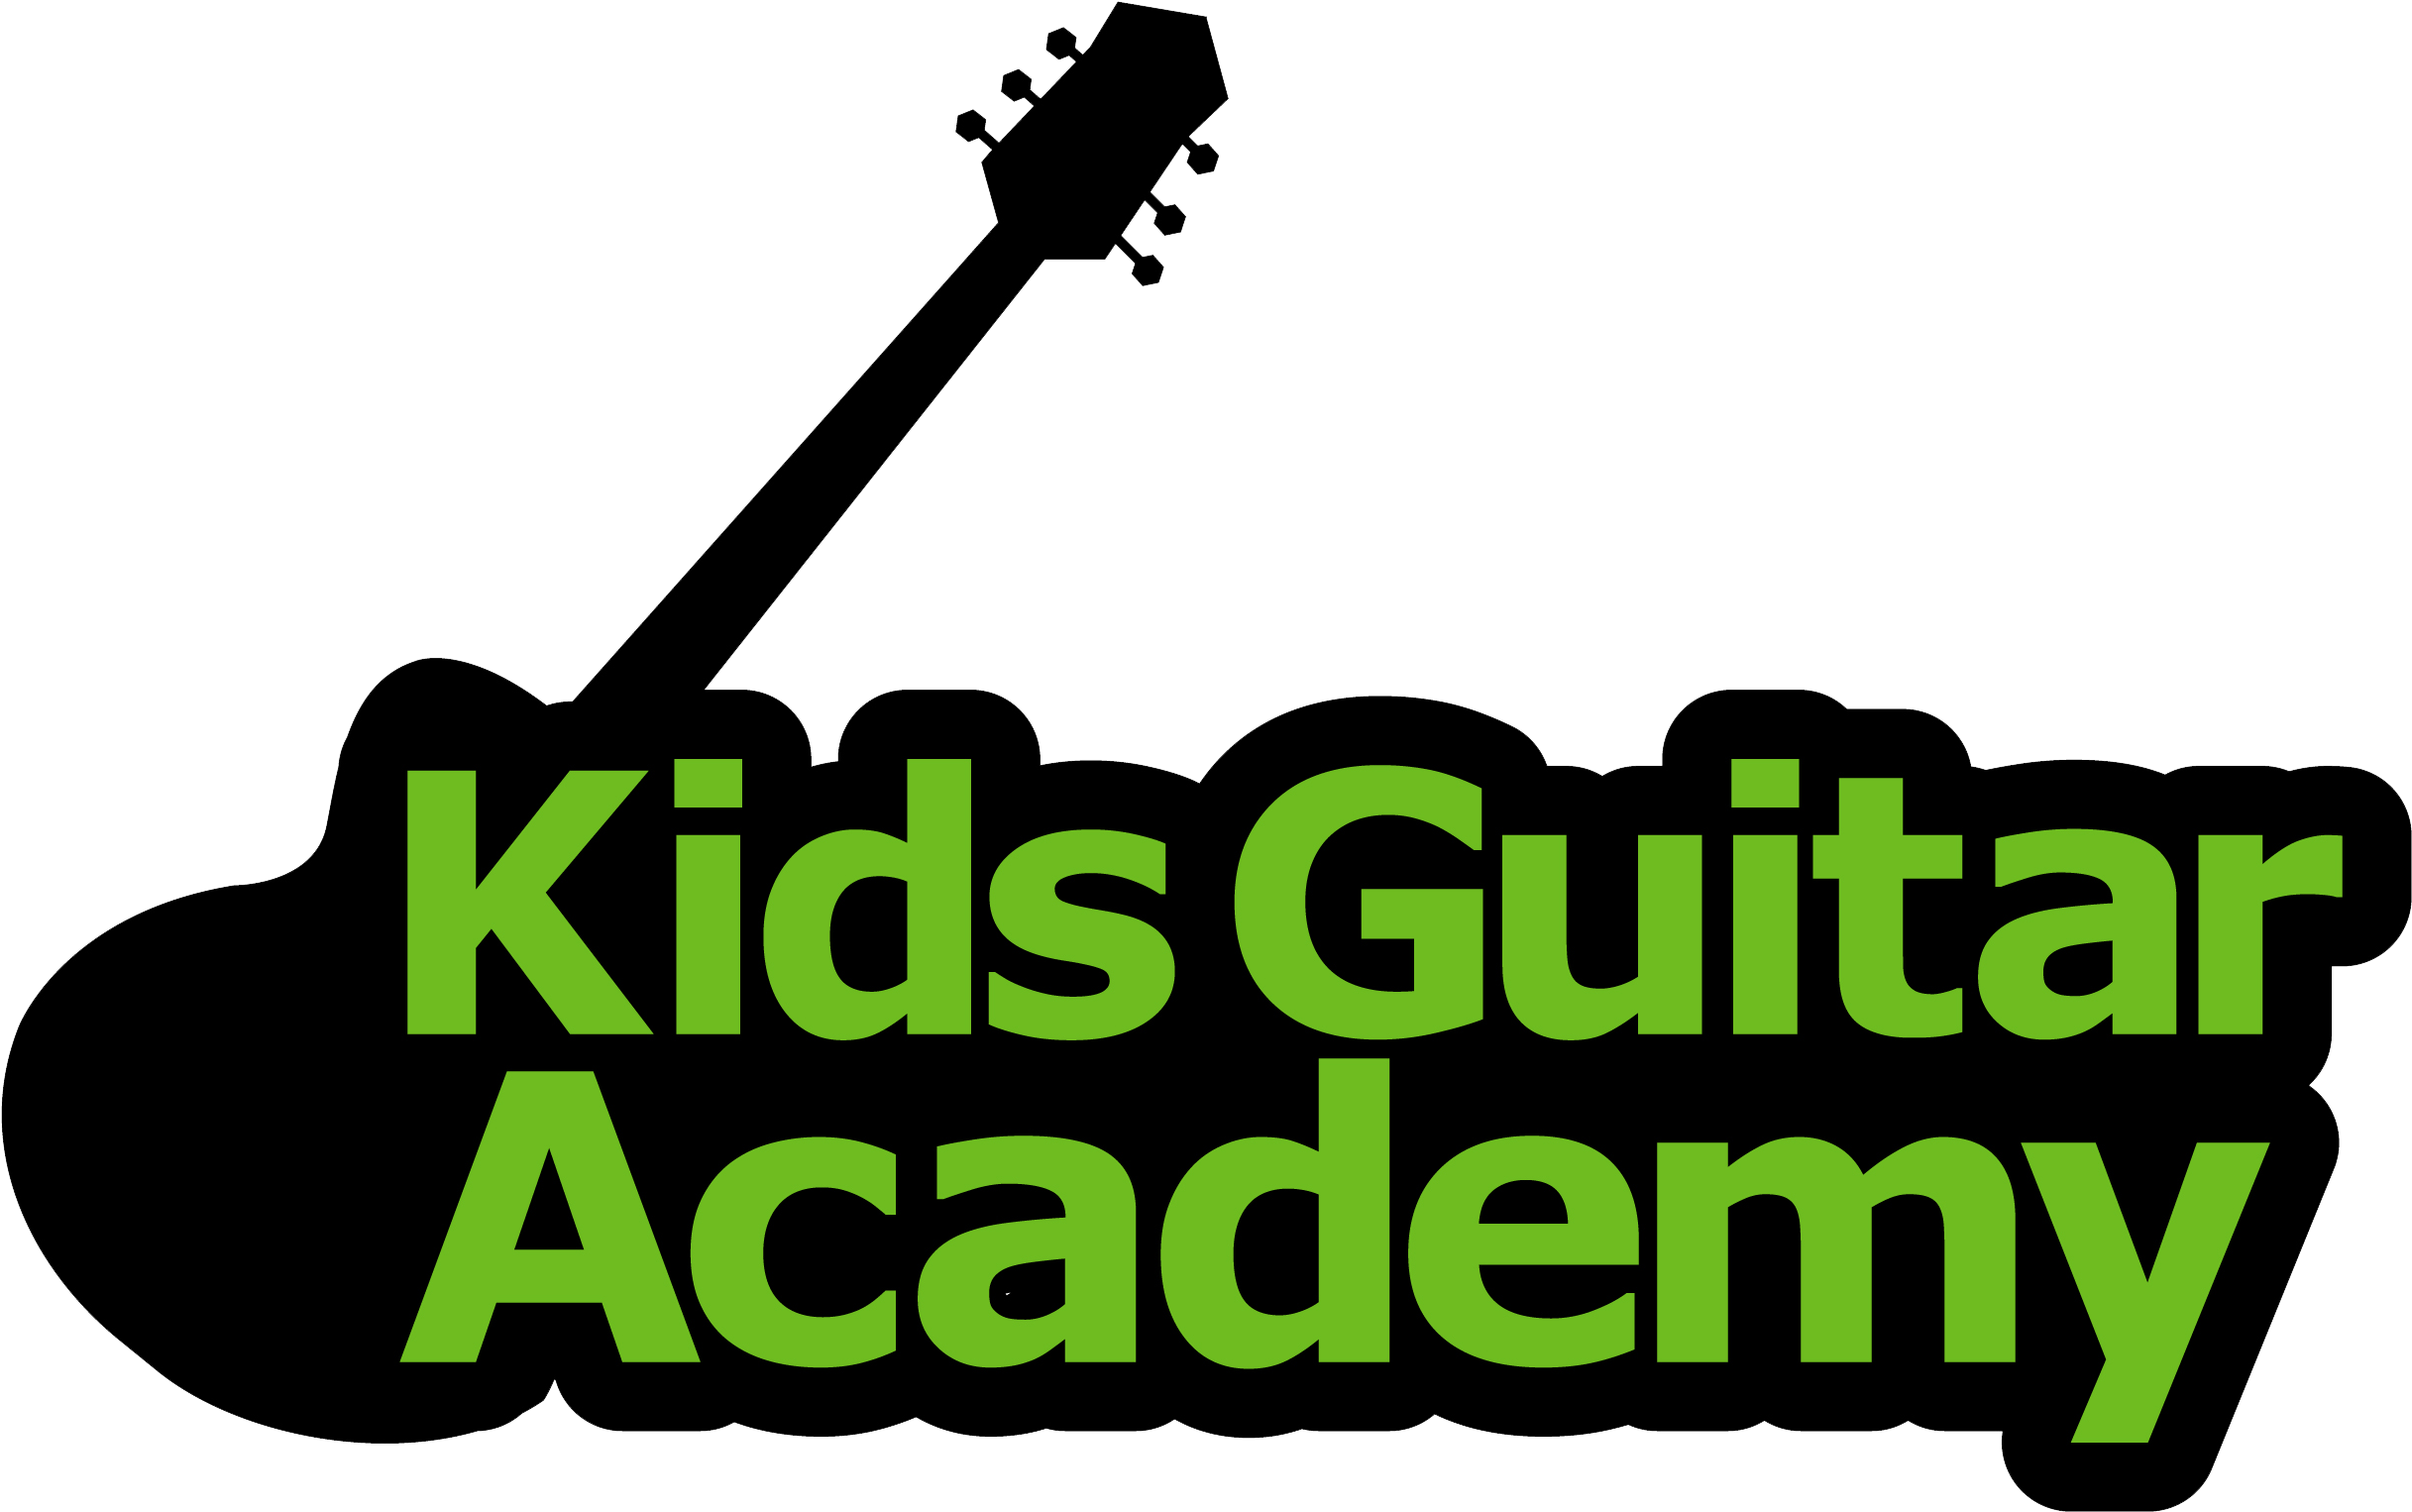 Kids Guitar Lessons - Music Academy (2440x1540)